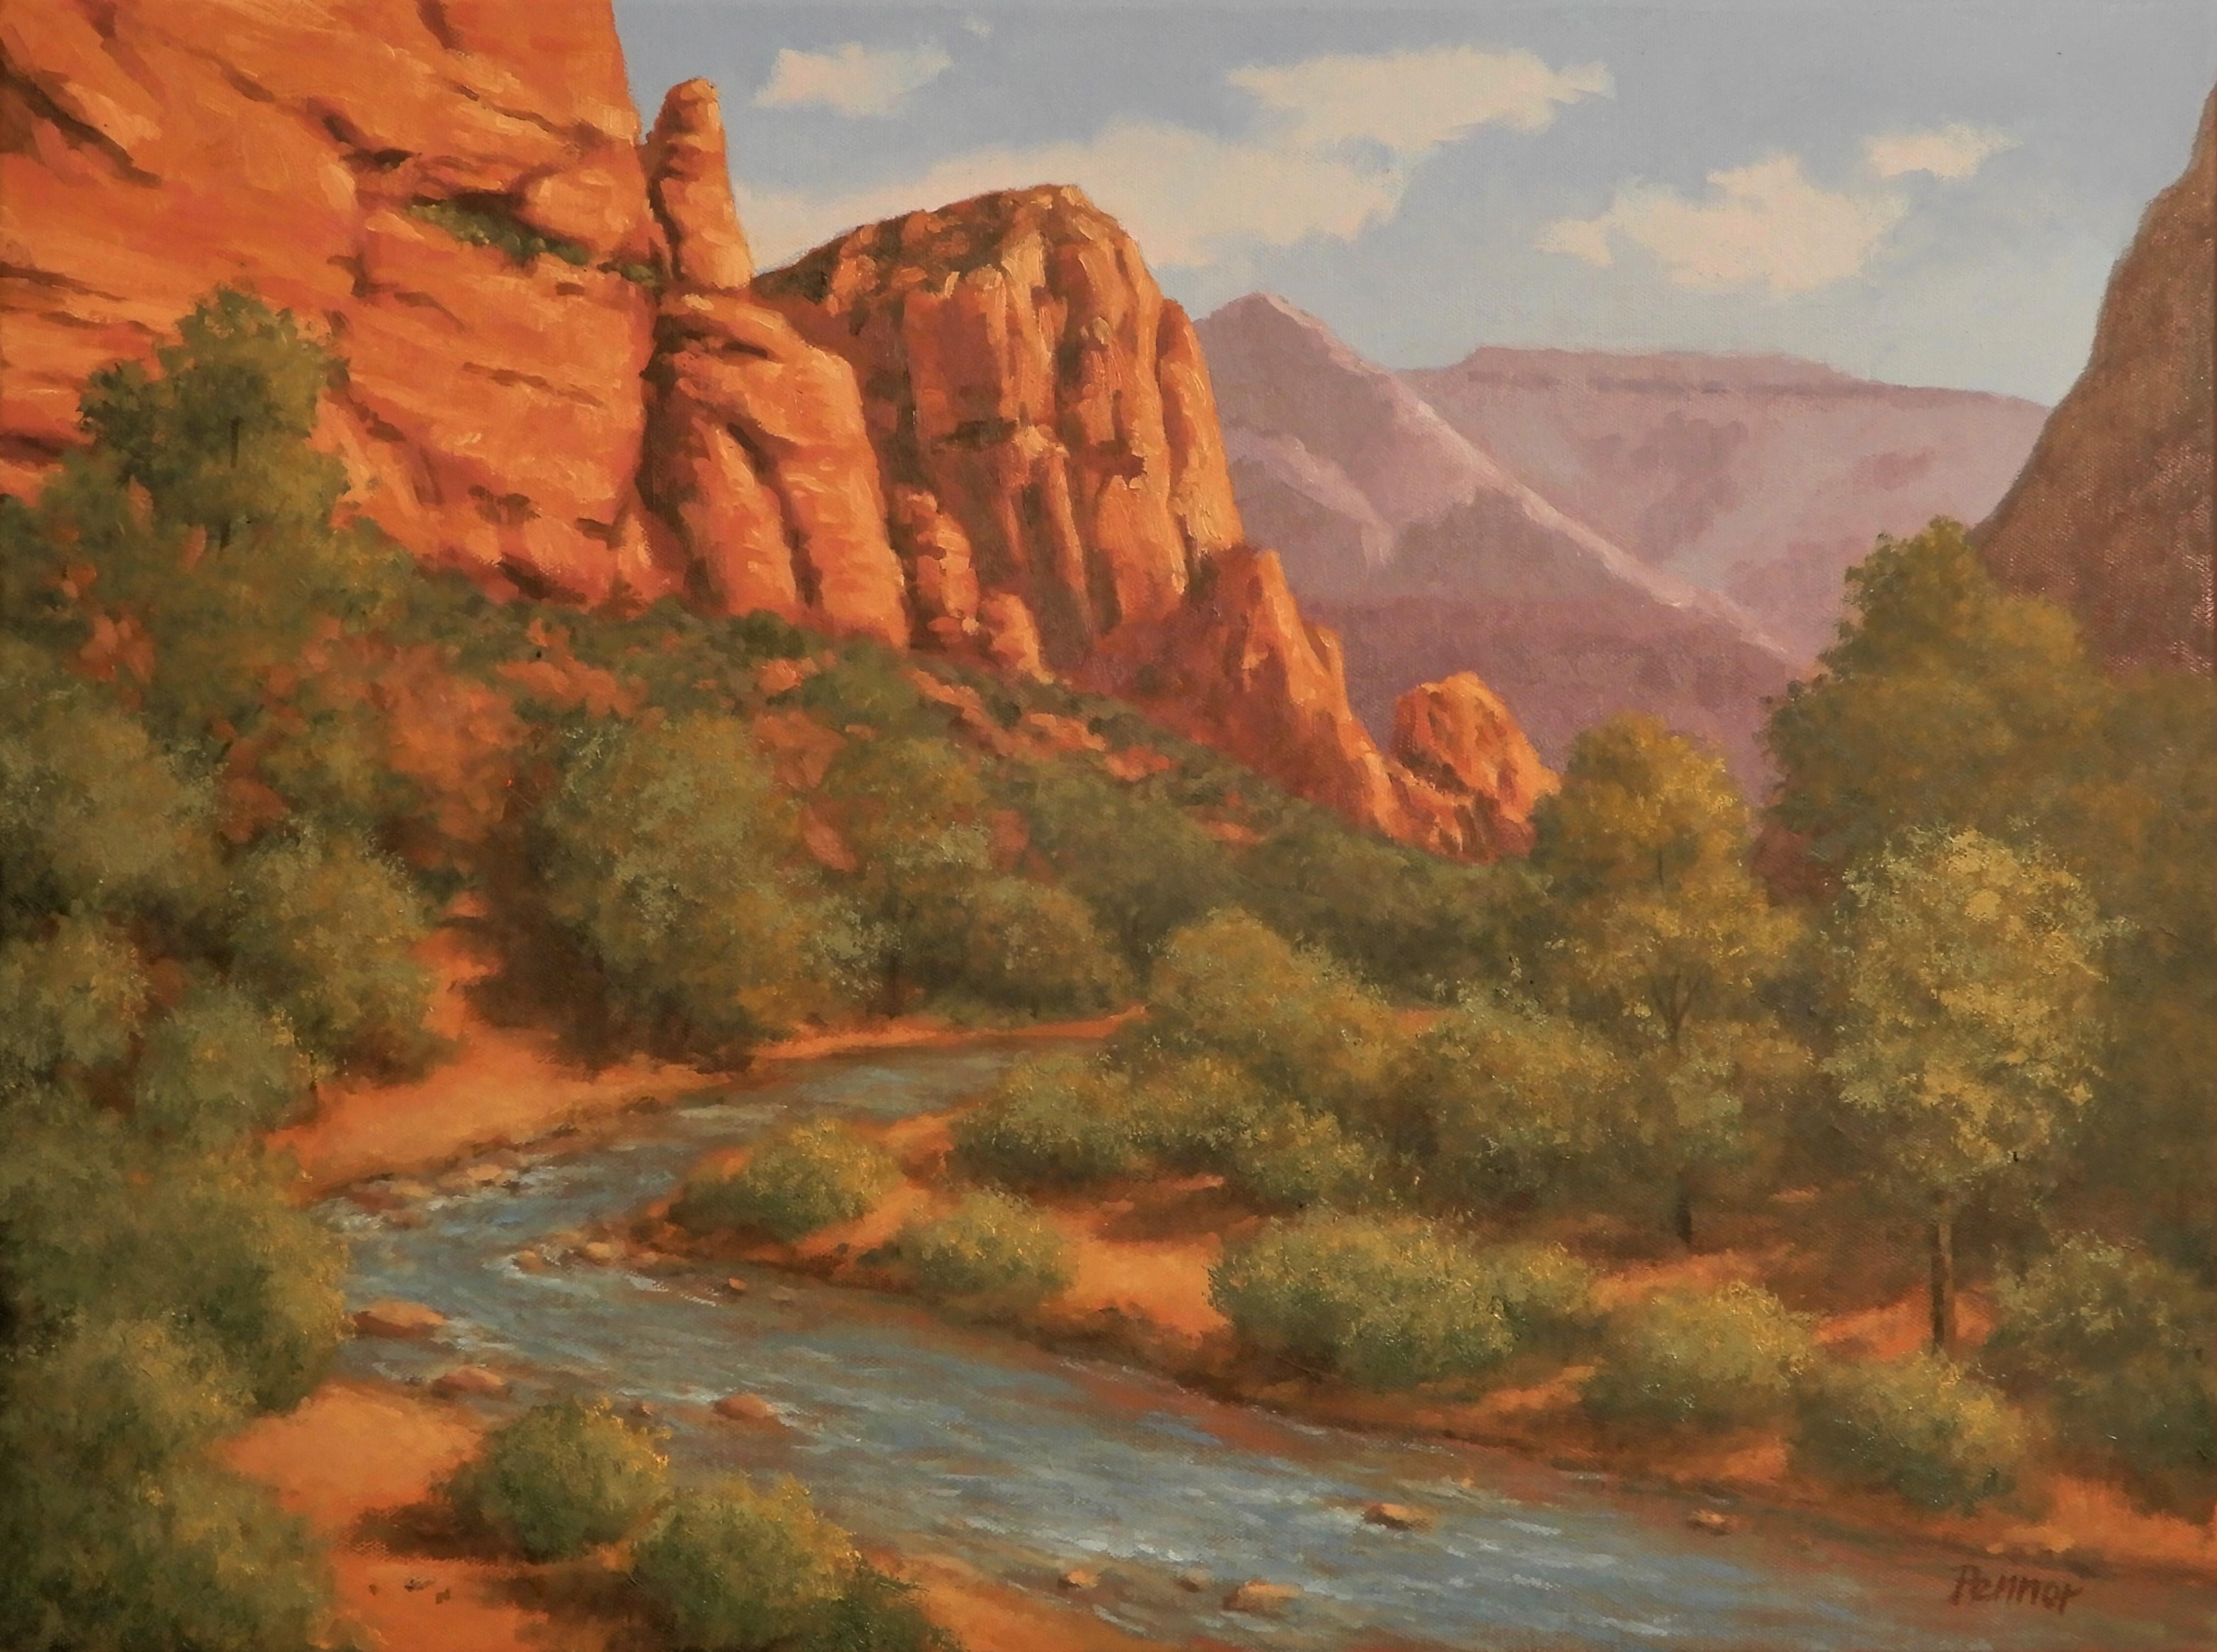 Robert Pennor Landscape Painting - Zion National Park, Oil Painting